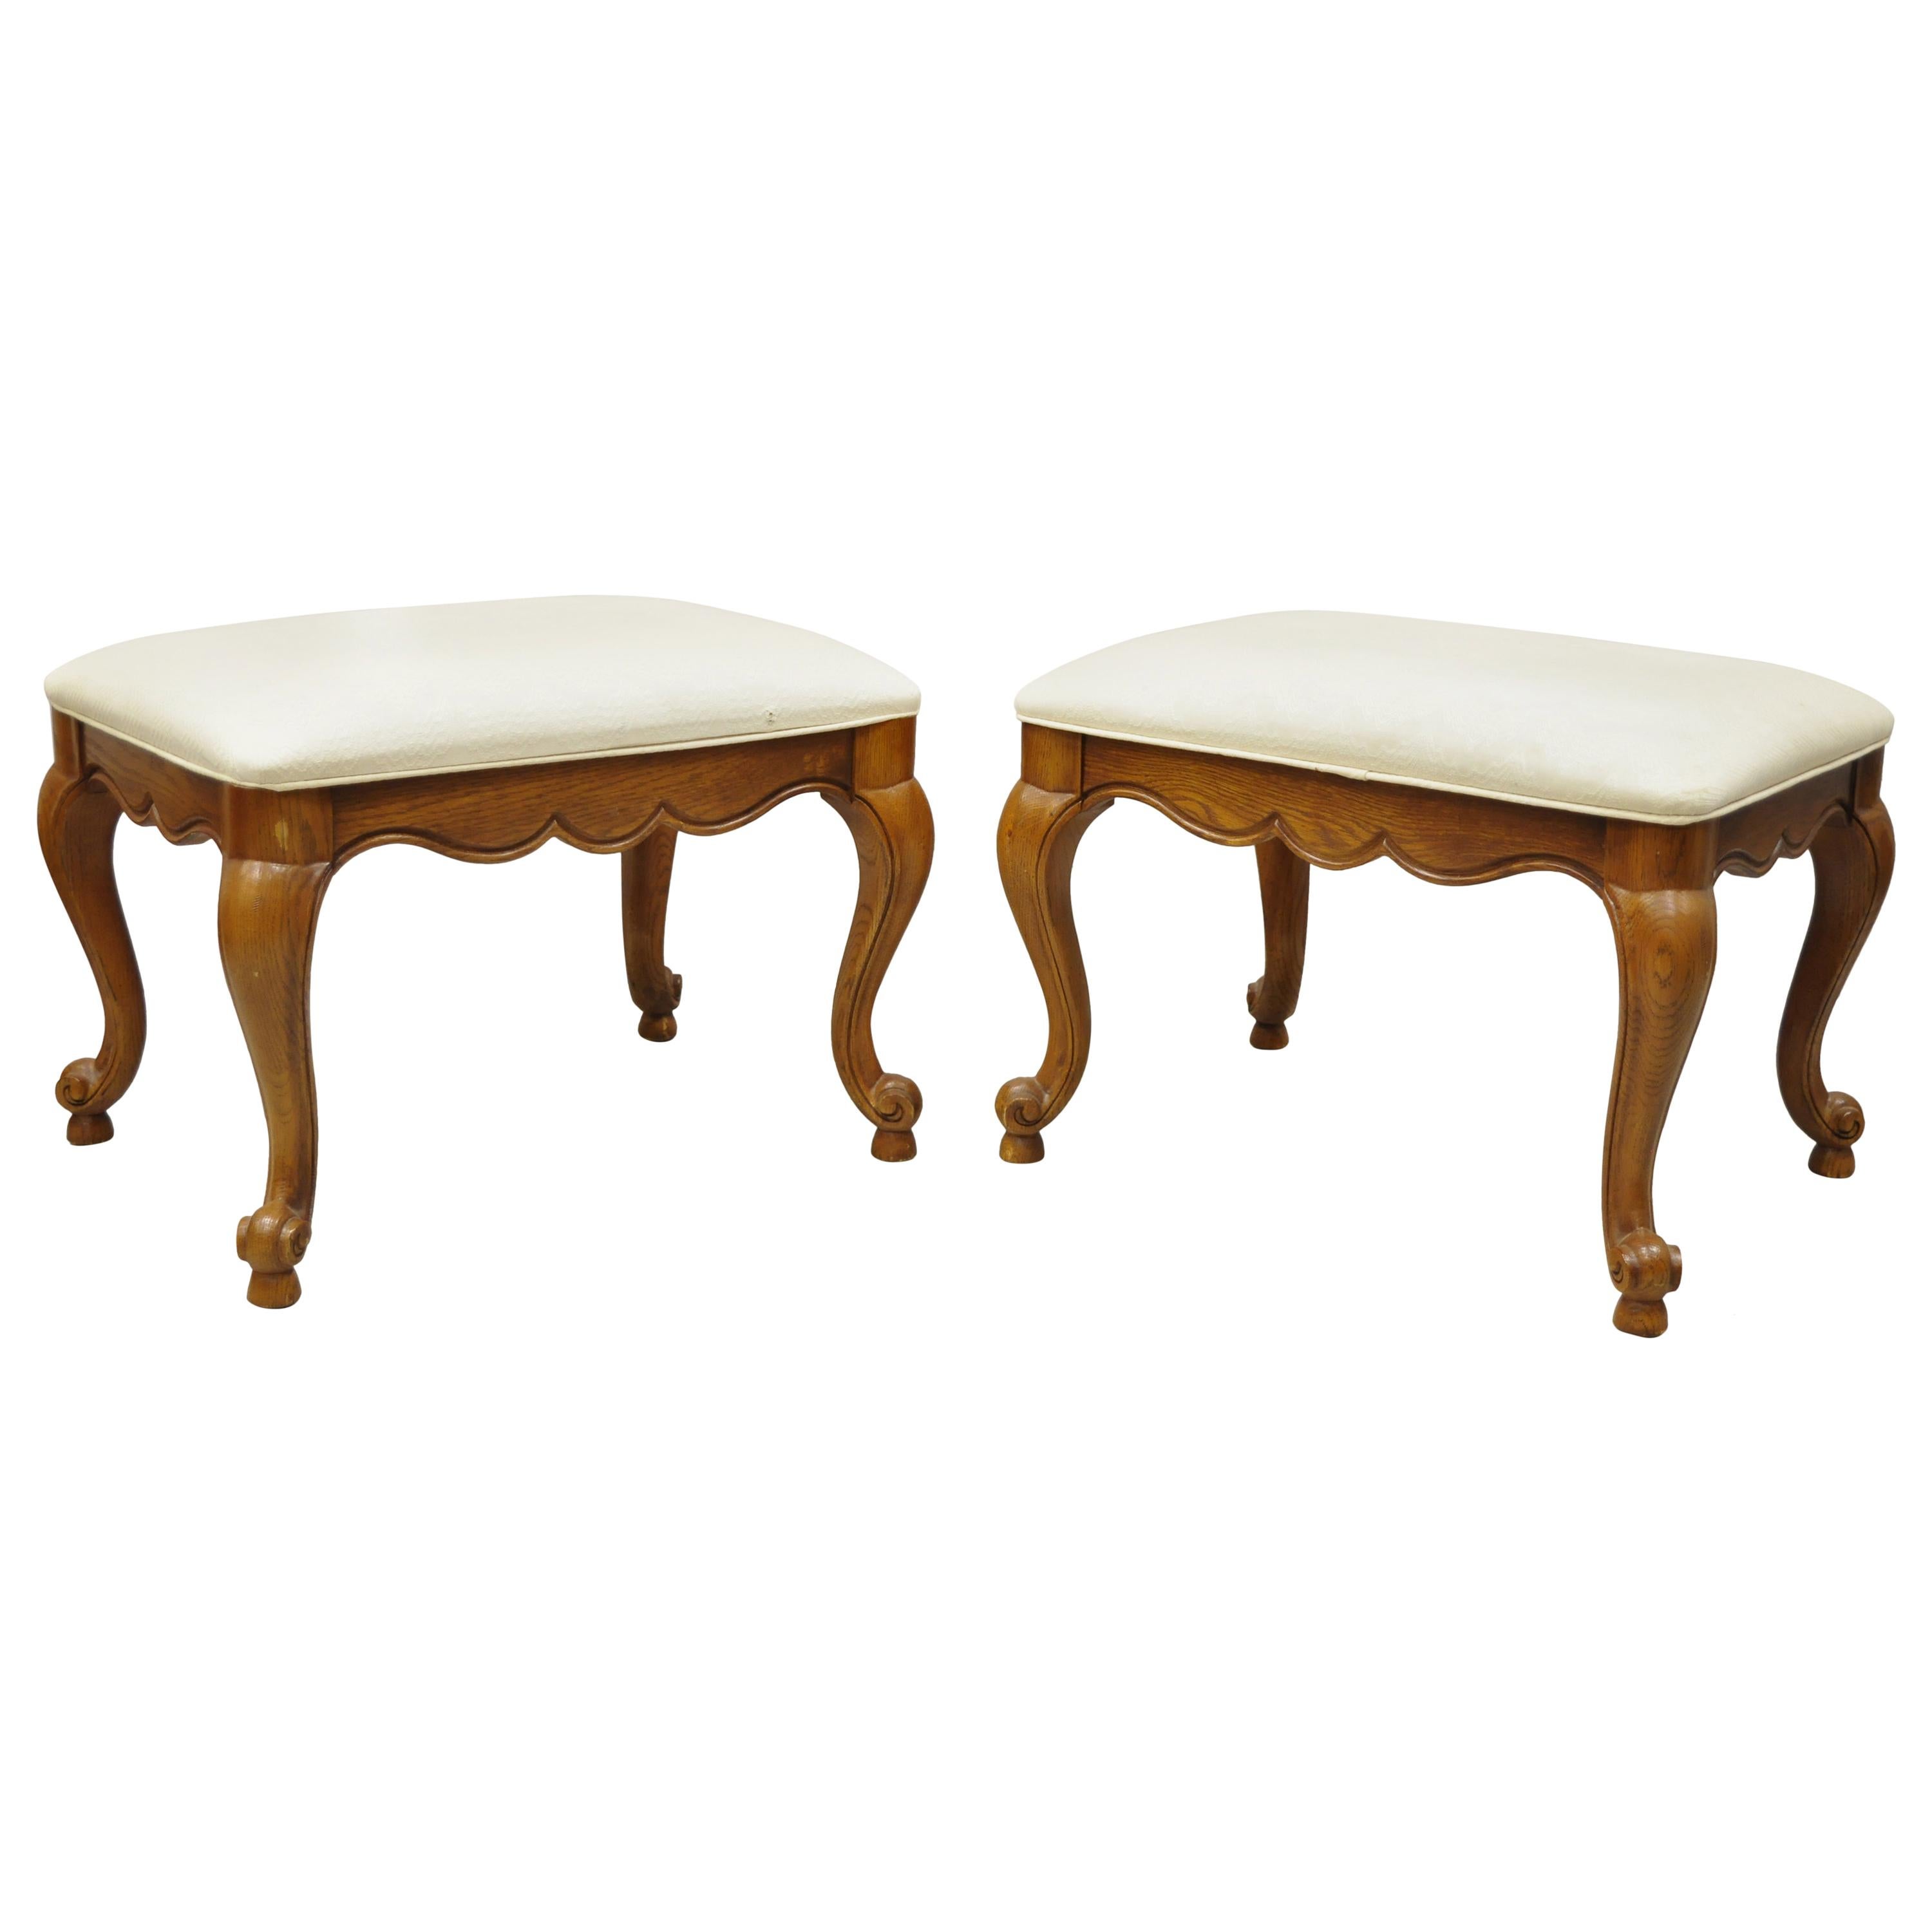 Vintage Drexel French Provincial Oakwood Cabriole Leg Stool Bench, a Pair